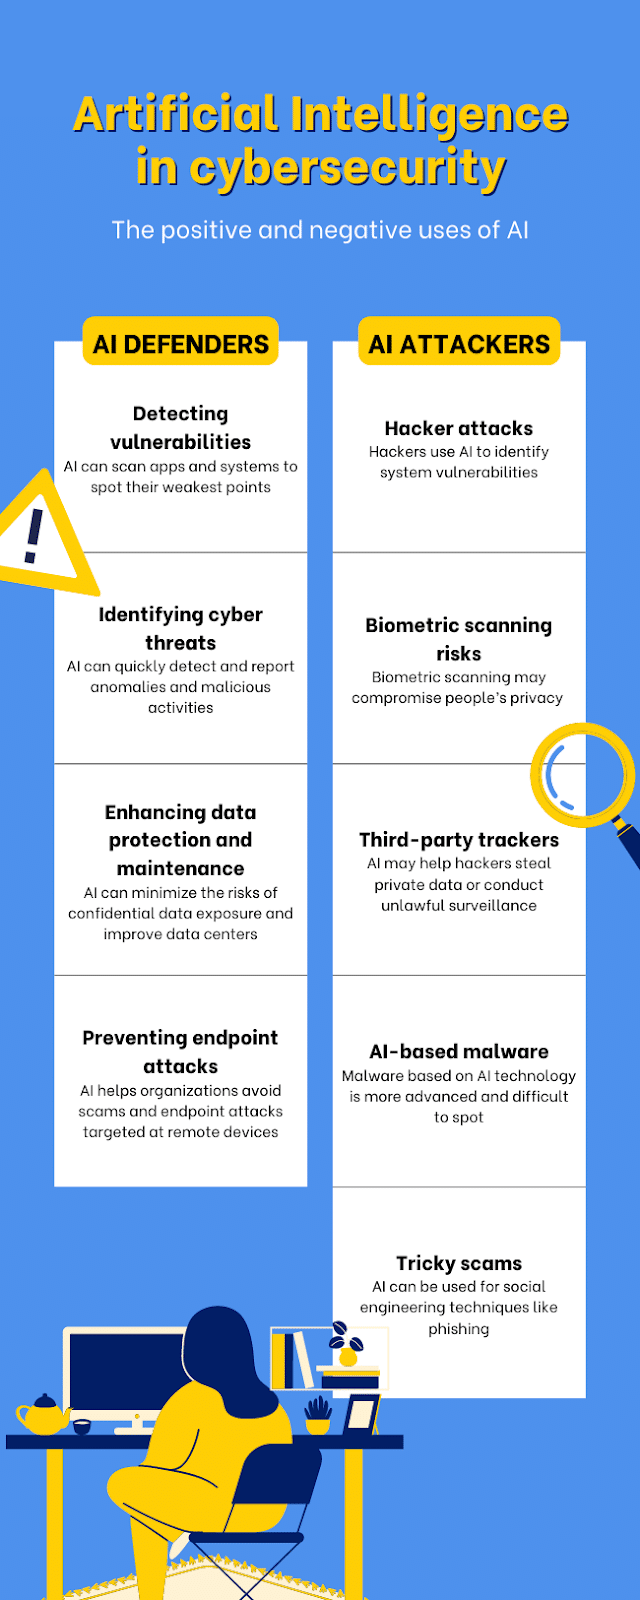 The positive and negative uses of AI in cybersecurity.